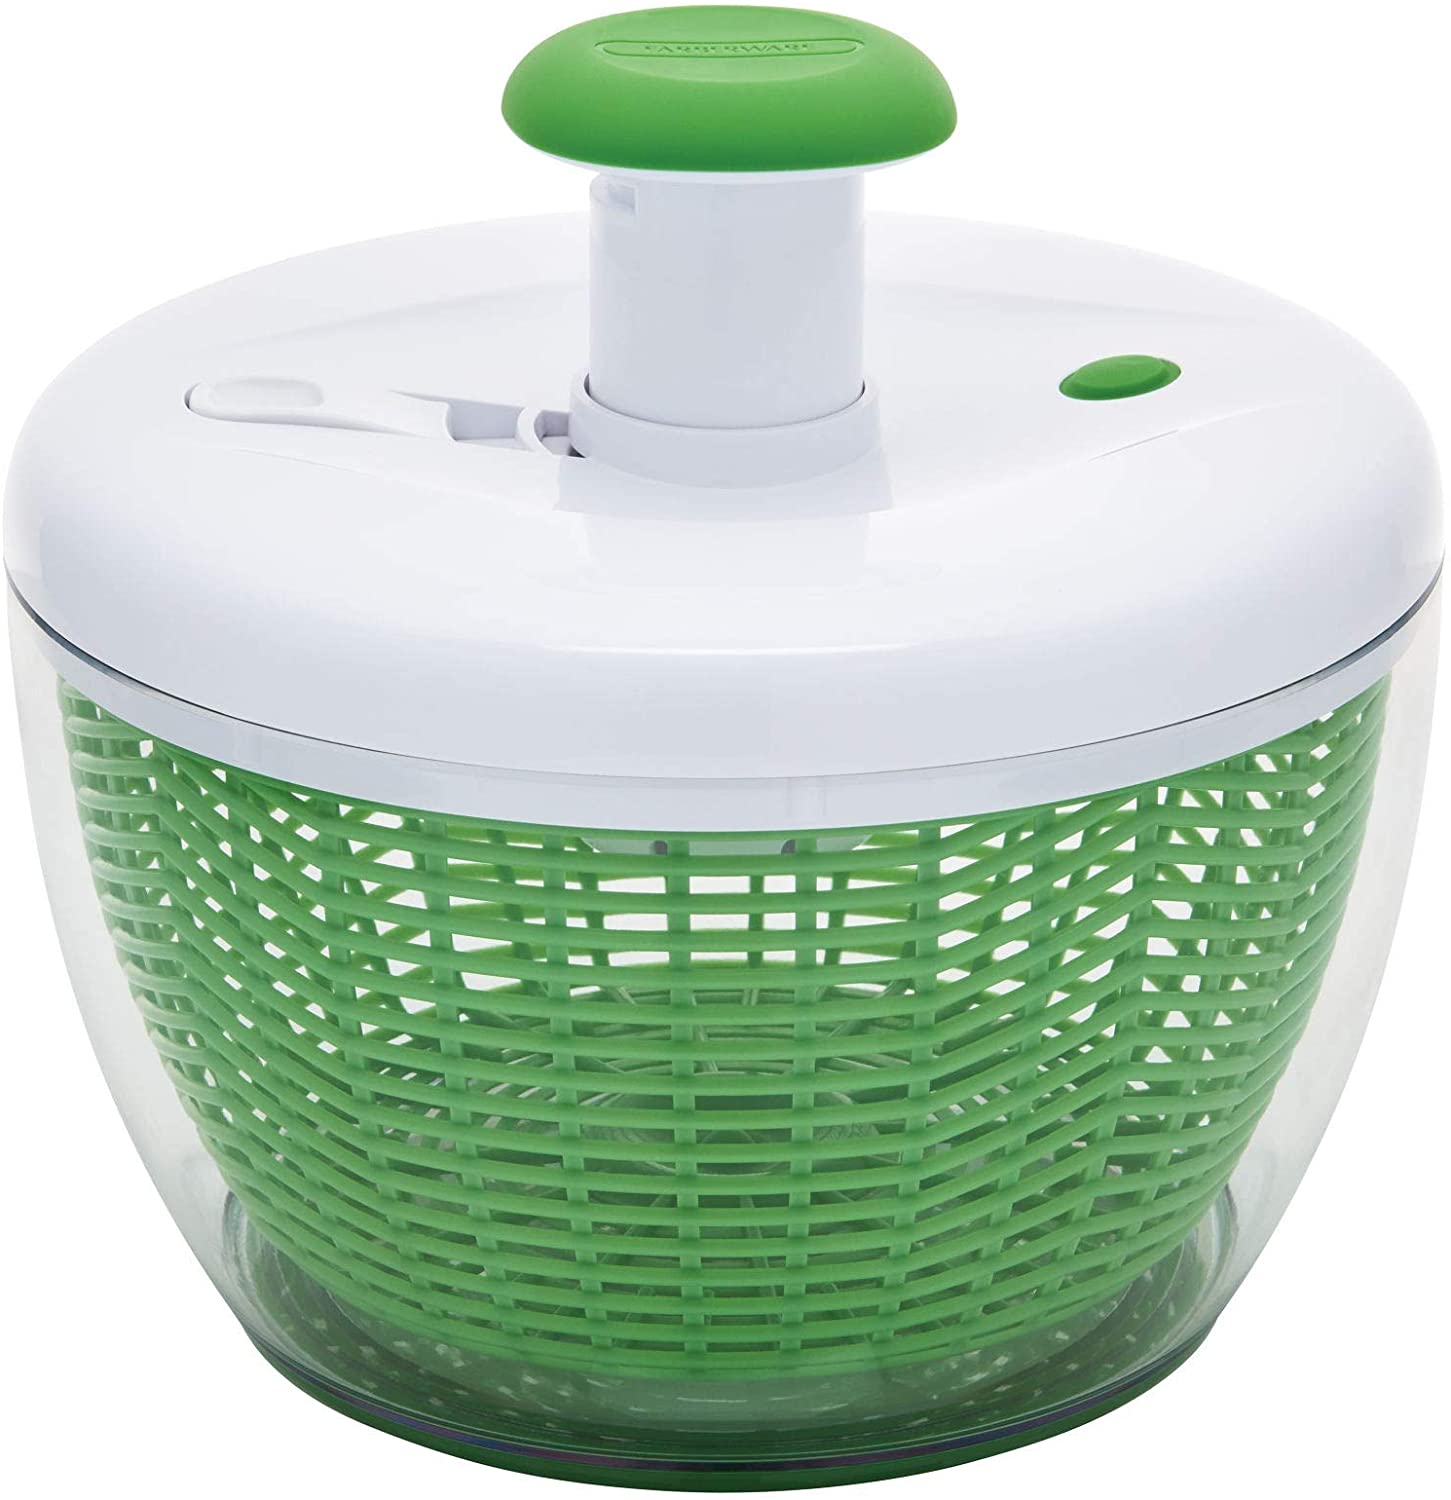 Fruit Dry Serve Lettuce Vegetables Bowl to Wash Classic Cuisine 82-KIT1109 Salad Spinner-3.5 Quart Spinning Strainer Herbs-Clean Healthy Produce Trademark 